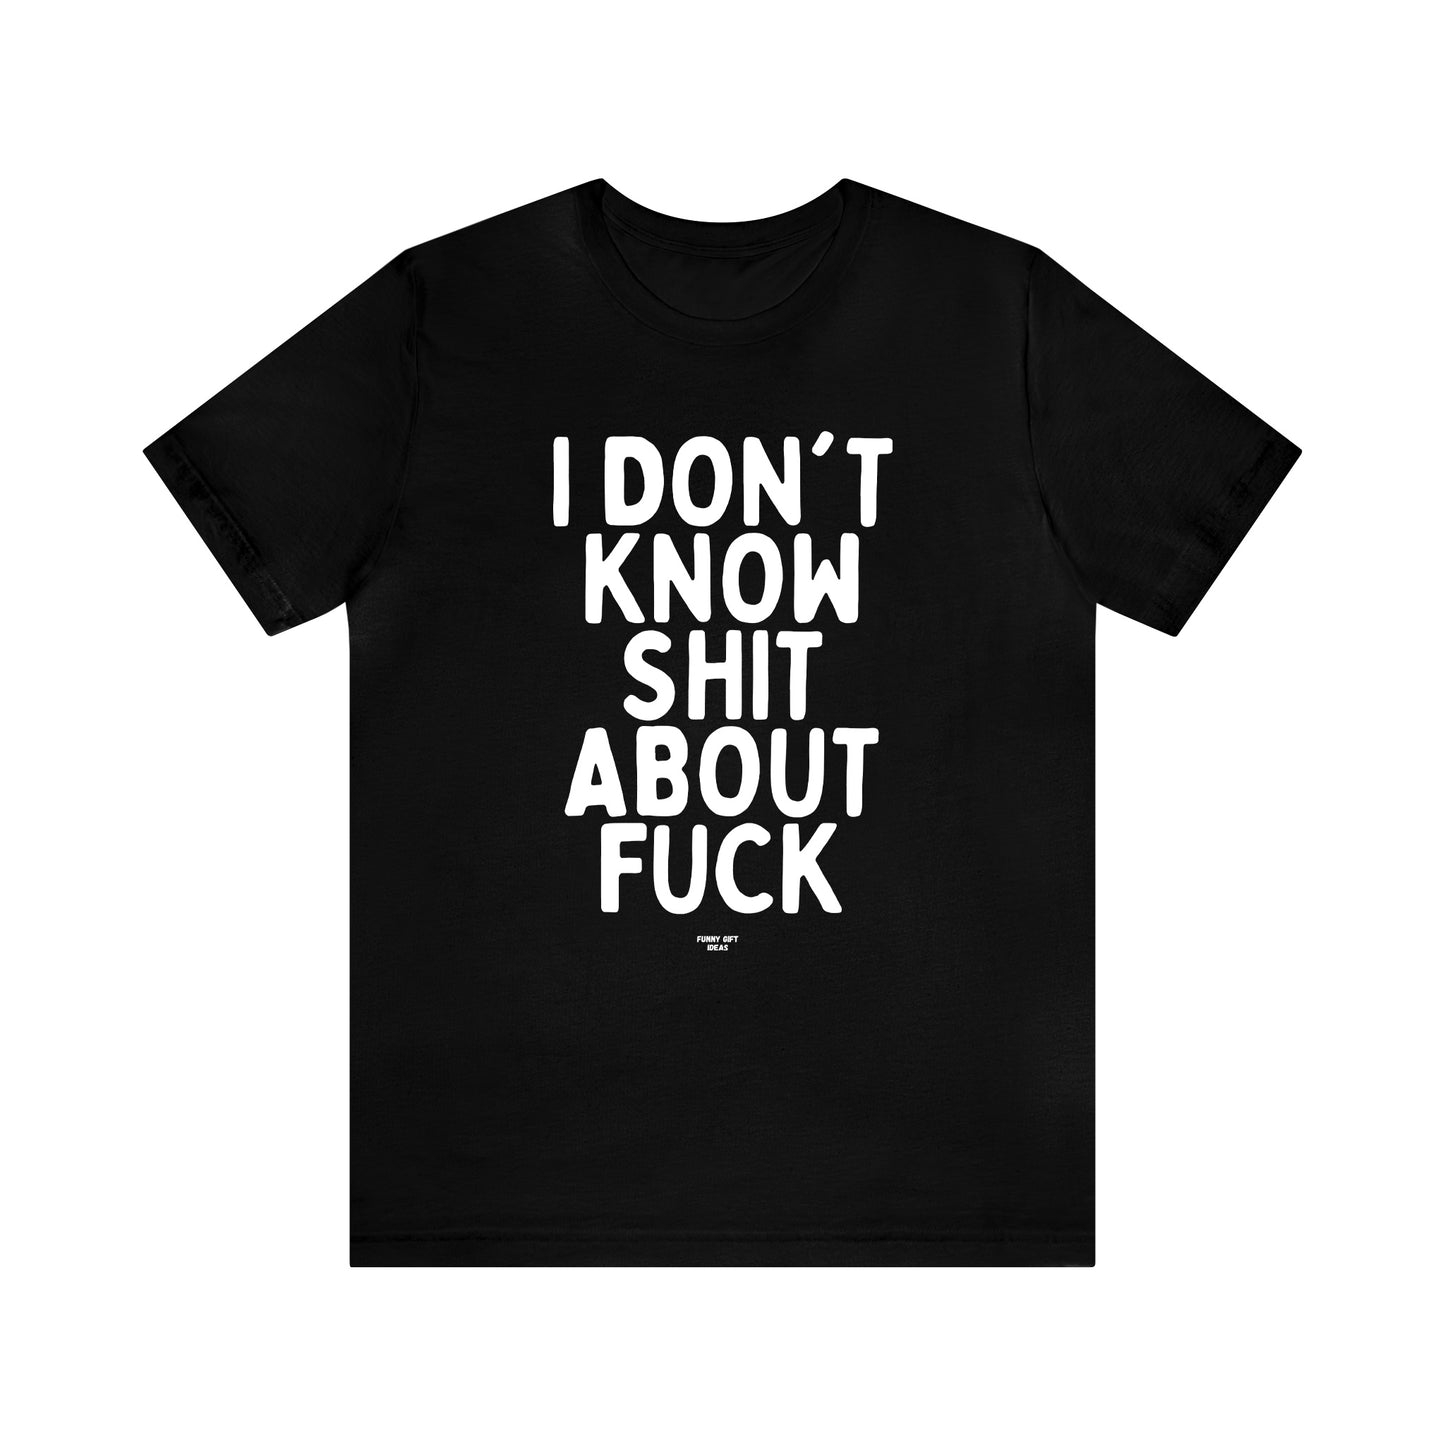 Mens T Shirts - I Don't Know Shit About Fuck - Funny Men T Shirts